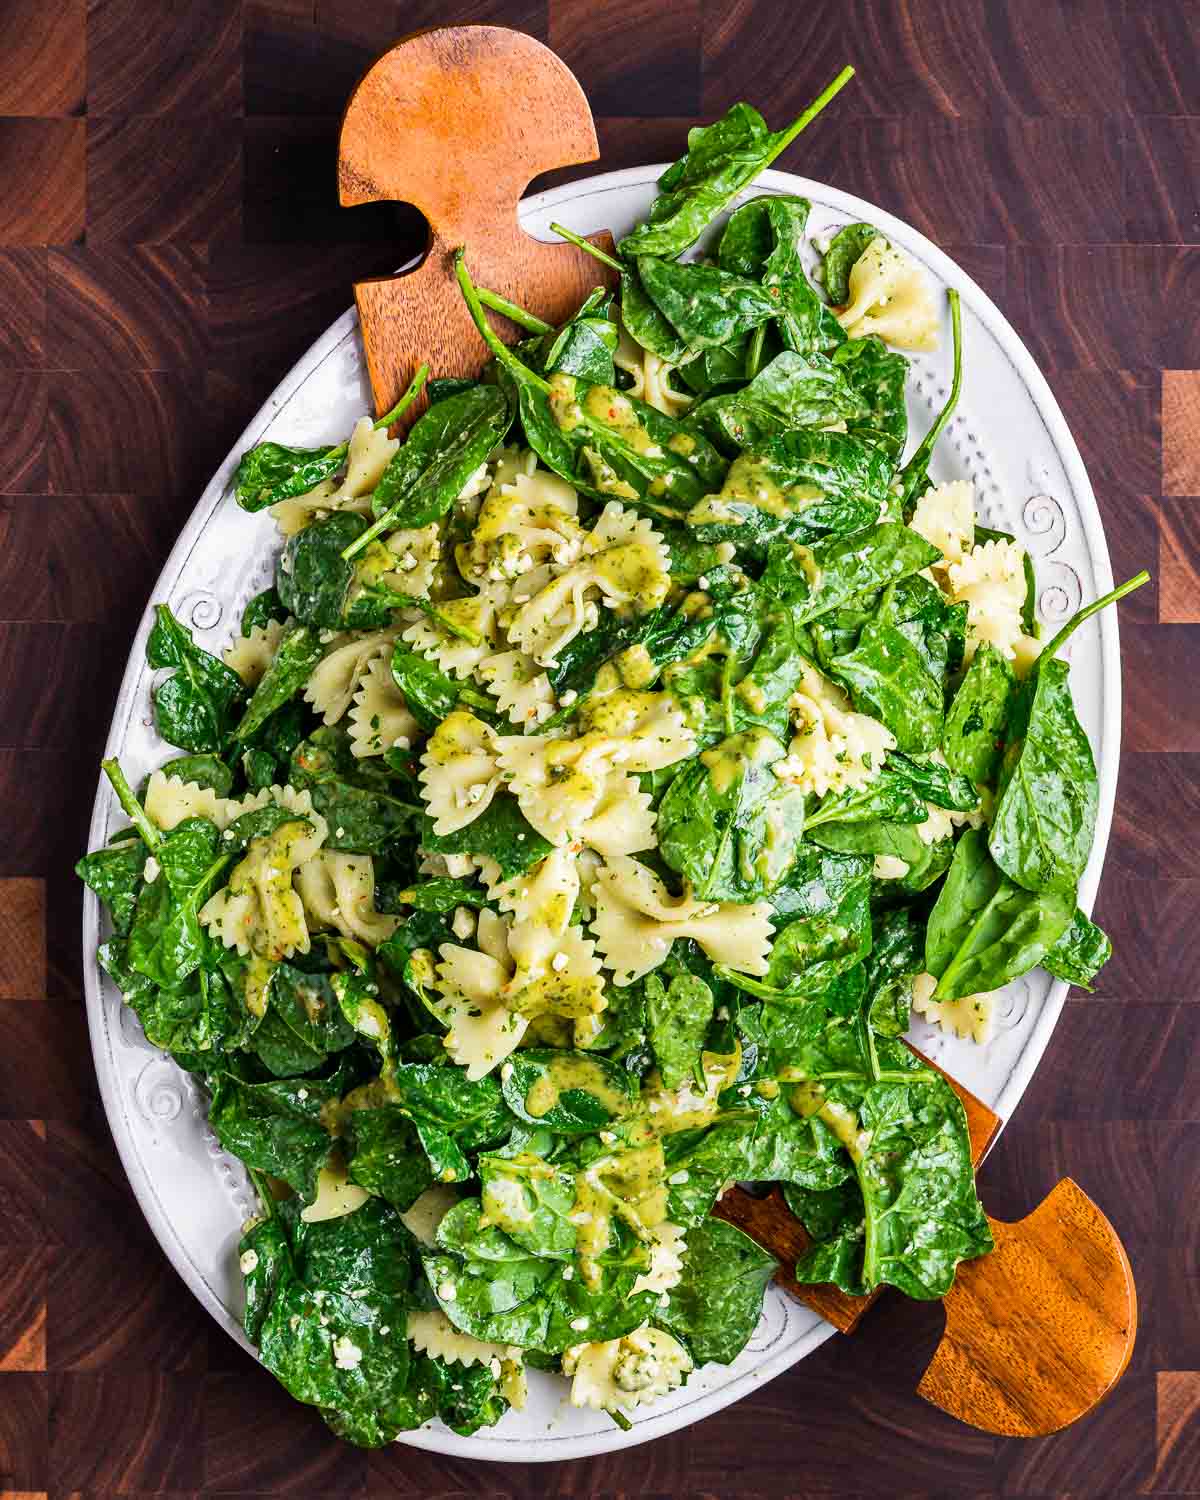 Spinach pasta salad in white platter on wood cutting board.